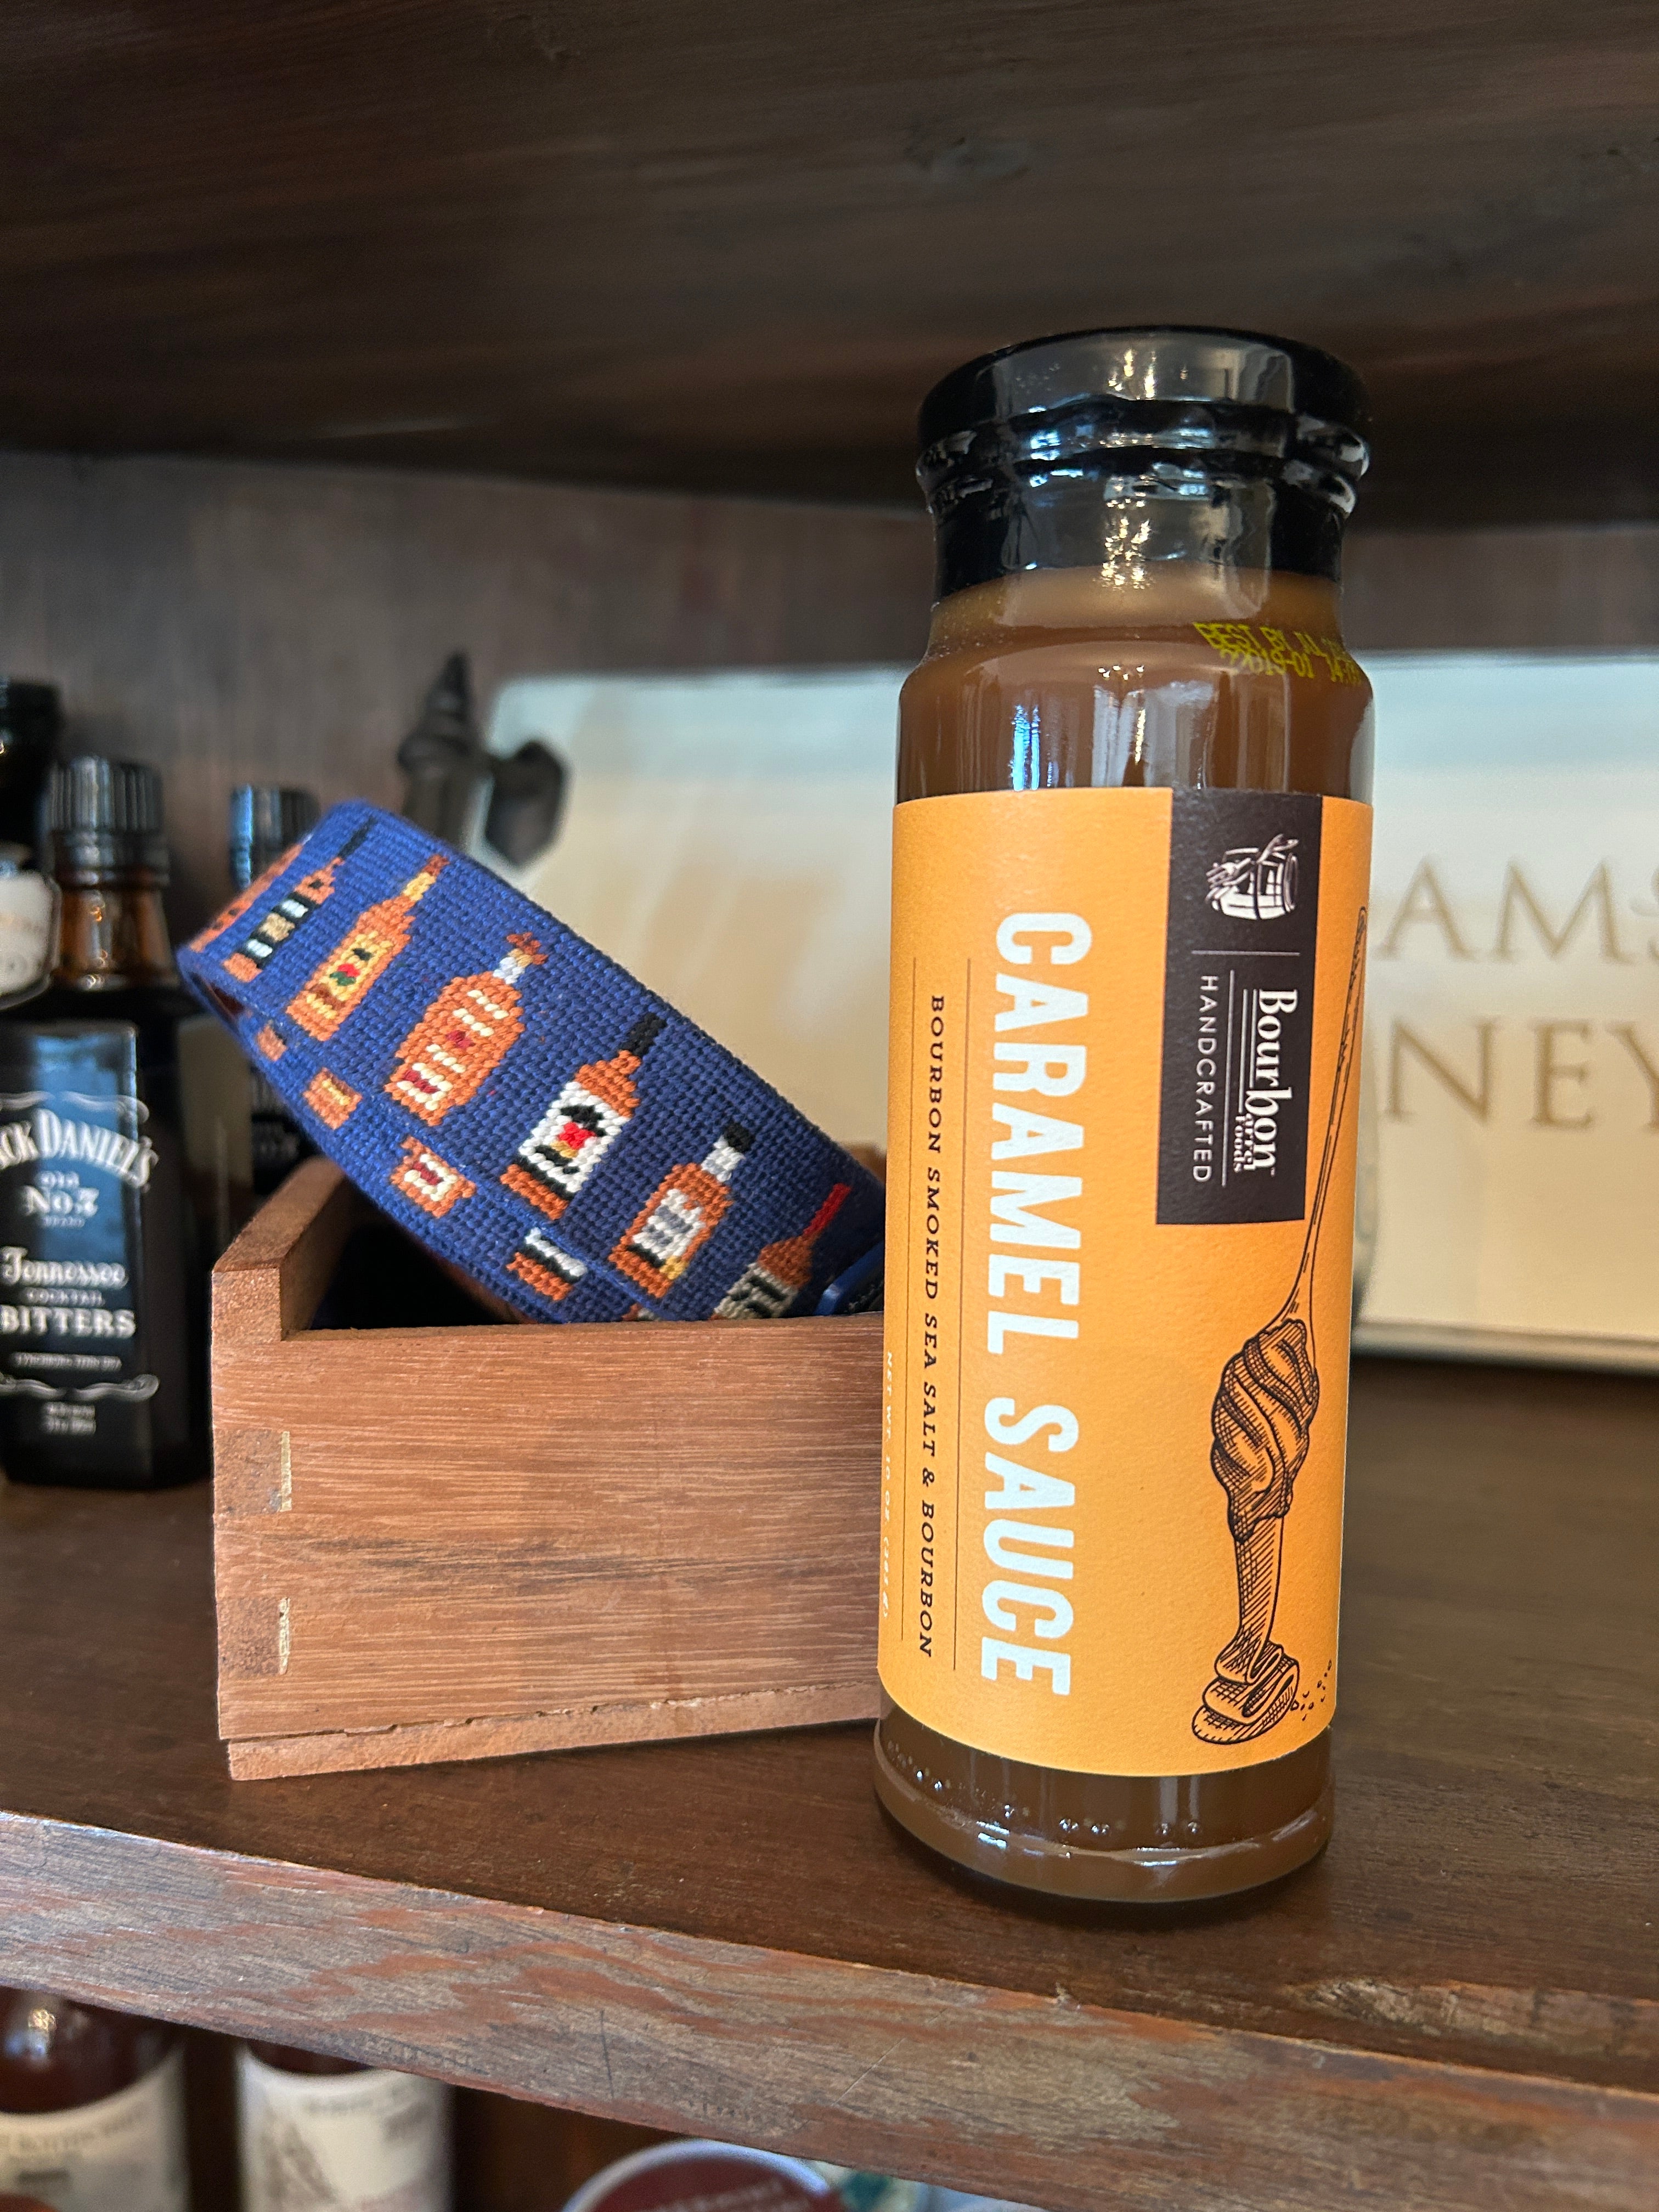 You will love the flavor of this Bourbon Smoked Sea Salt Caramel Sauce! The bourbon smoked sea salt creates a well-rounded flavor. Made in Kentucky, the bourbon capital of the U.S.!  It's so yummy warmed up. Add it to any of your sweet offerings like lattes or ice cream!  Size: 10oz